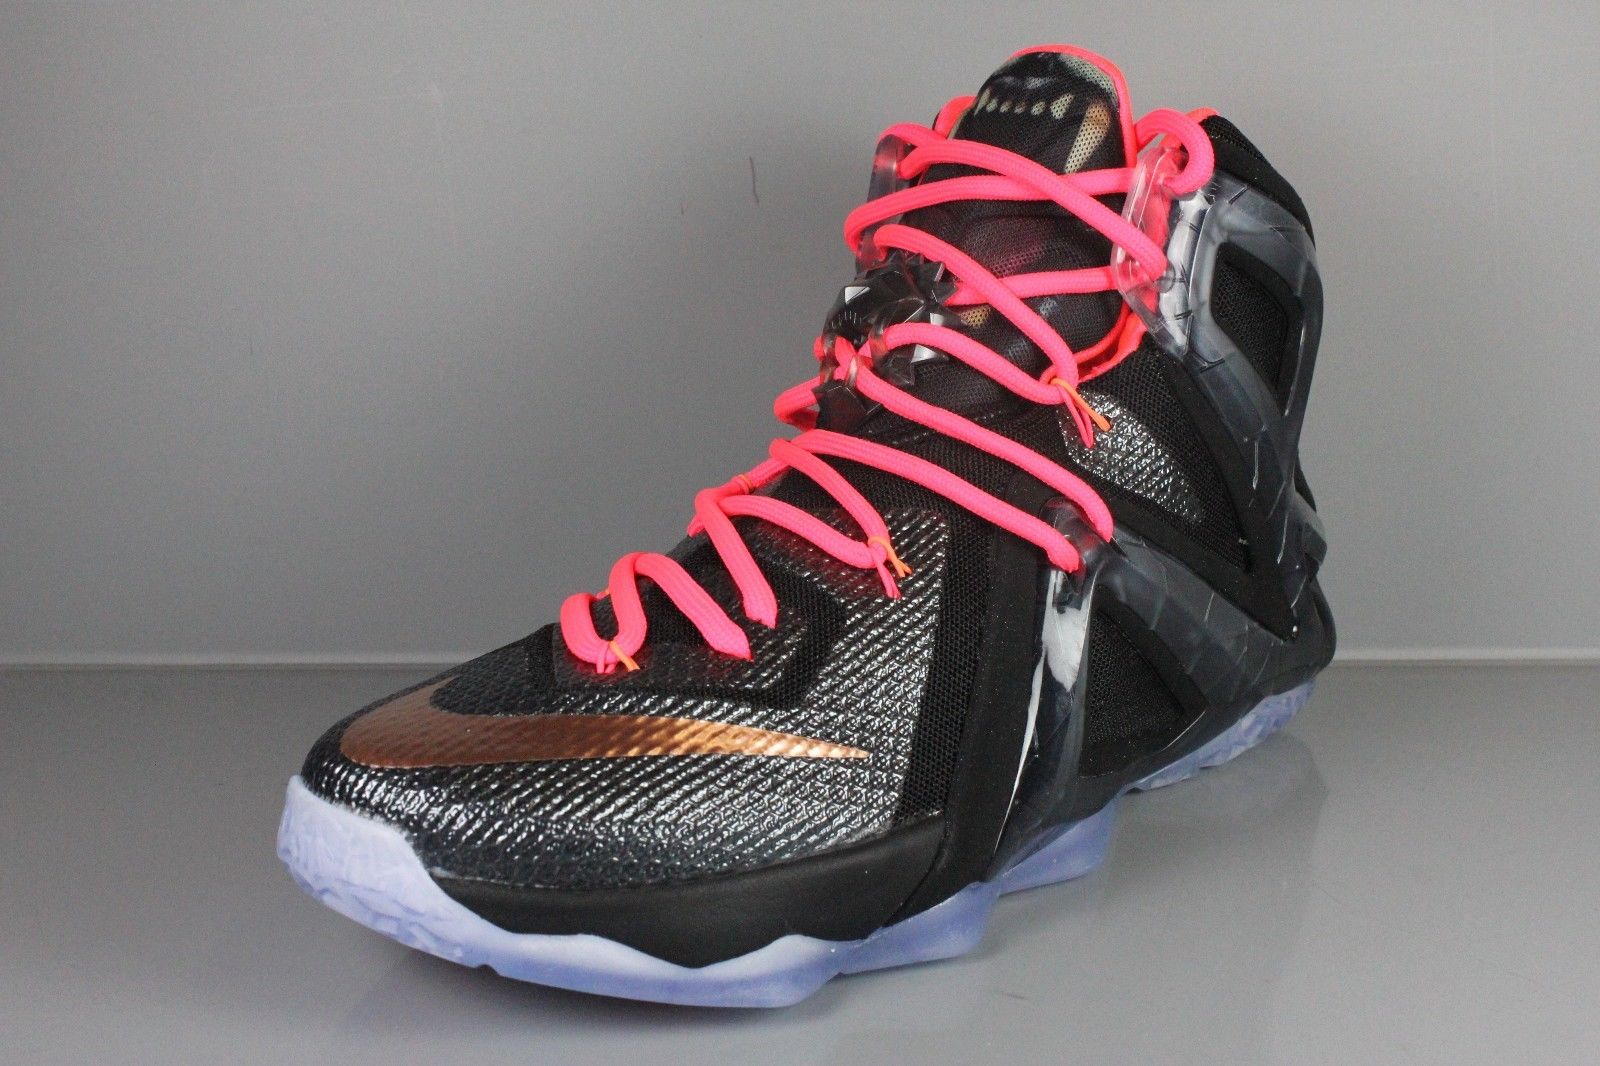 Will LeBron James Ever Wear This Nike LeBron 12 Elite? | Sole Collector